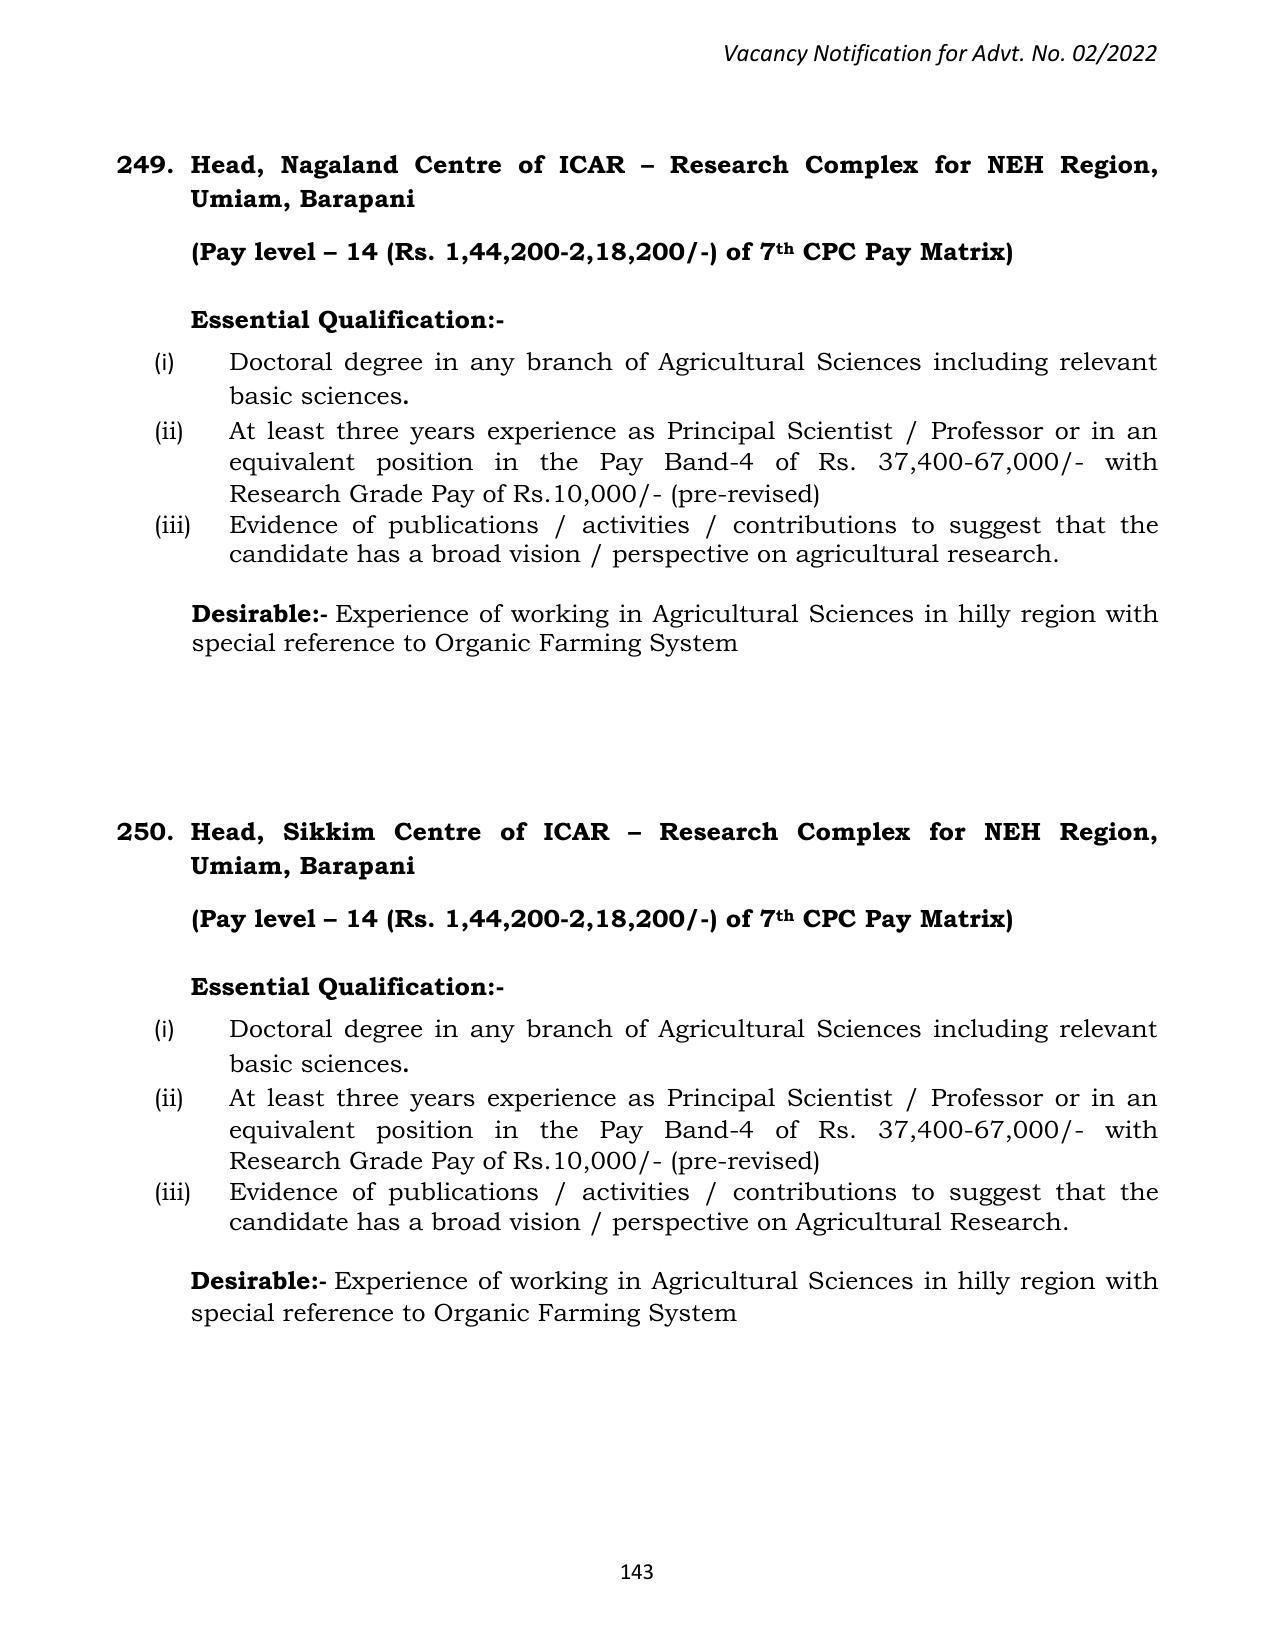 ASRB Non-Research Management Recruitment 2022 - Page 143